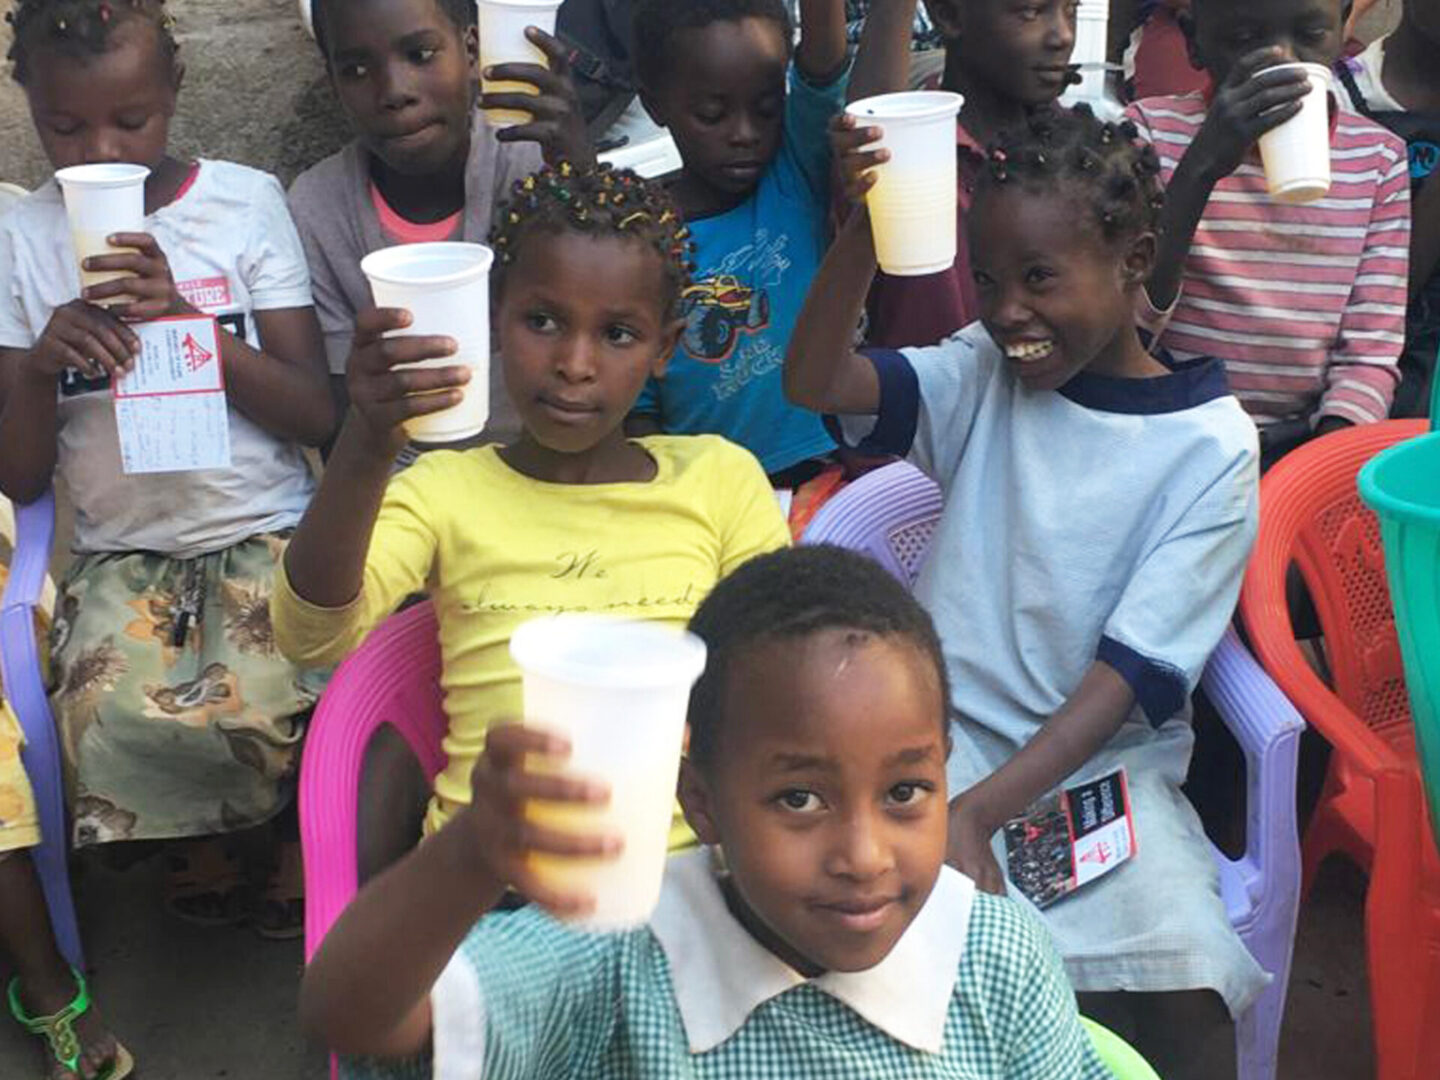 A group of children holding cups in their hands.